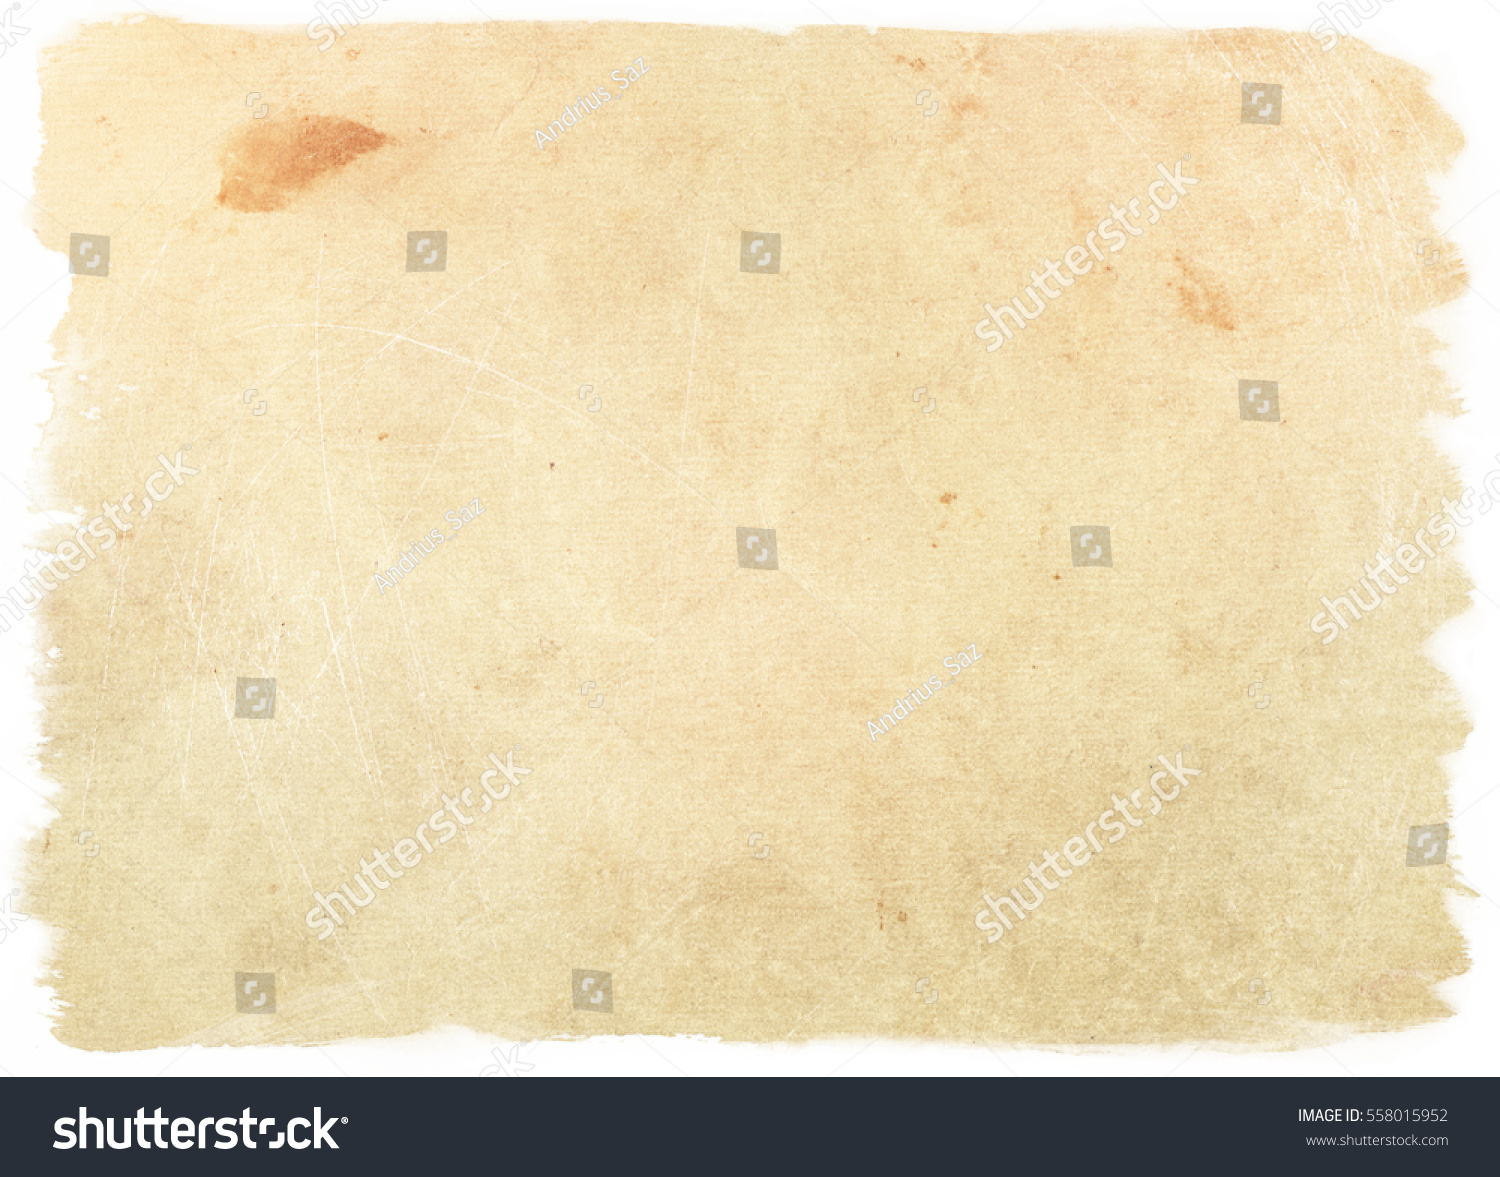 brown empty old vintage paper background. Paper texture #558015952